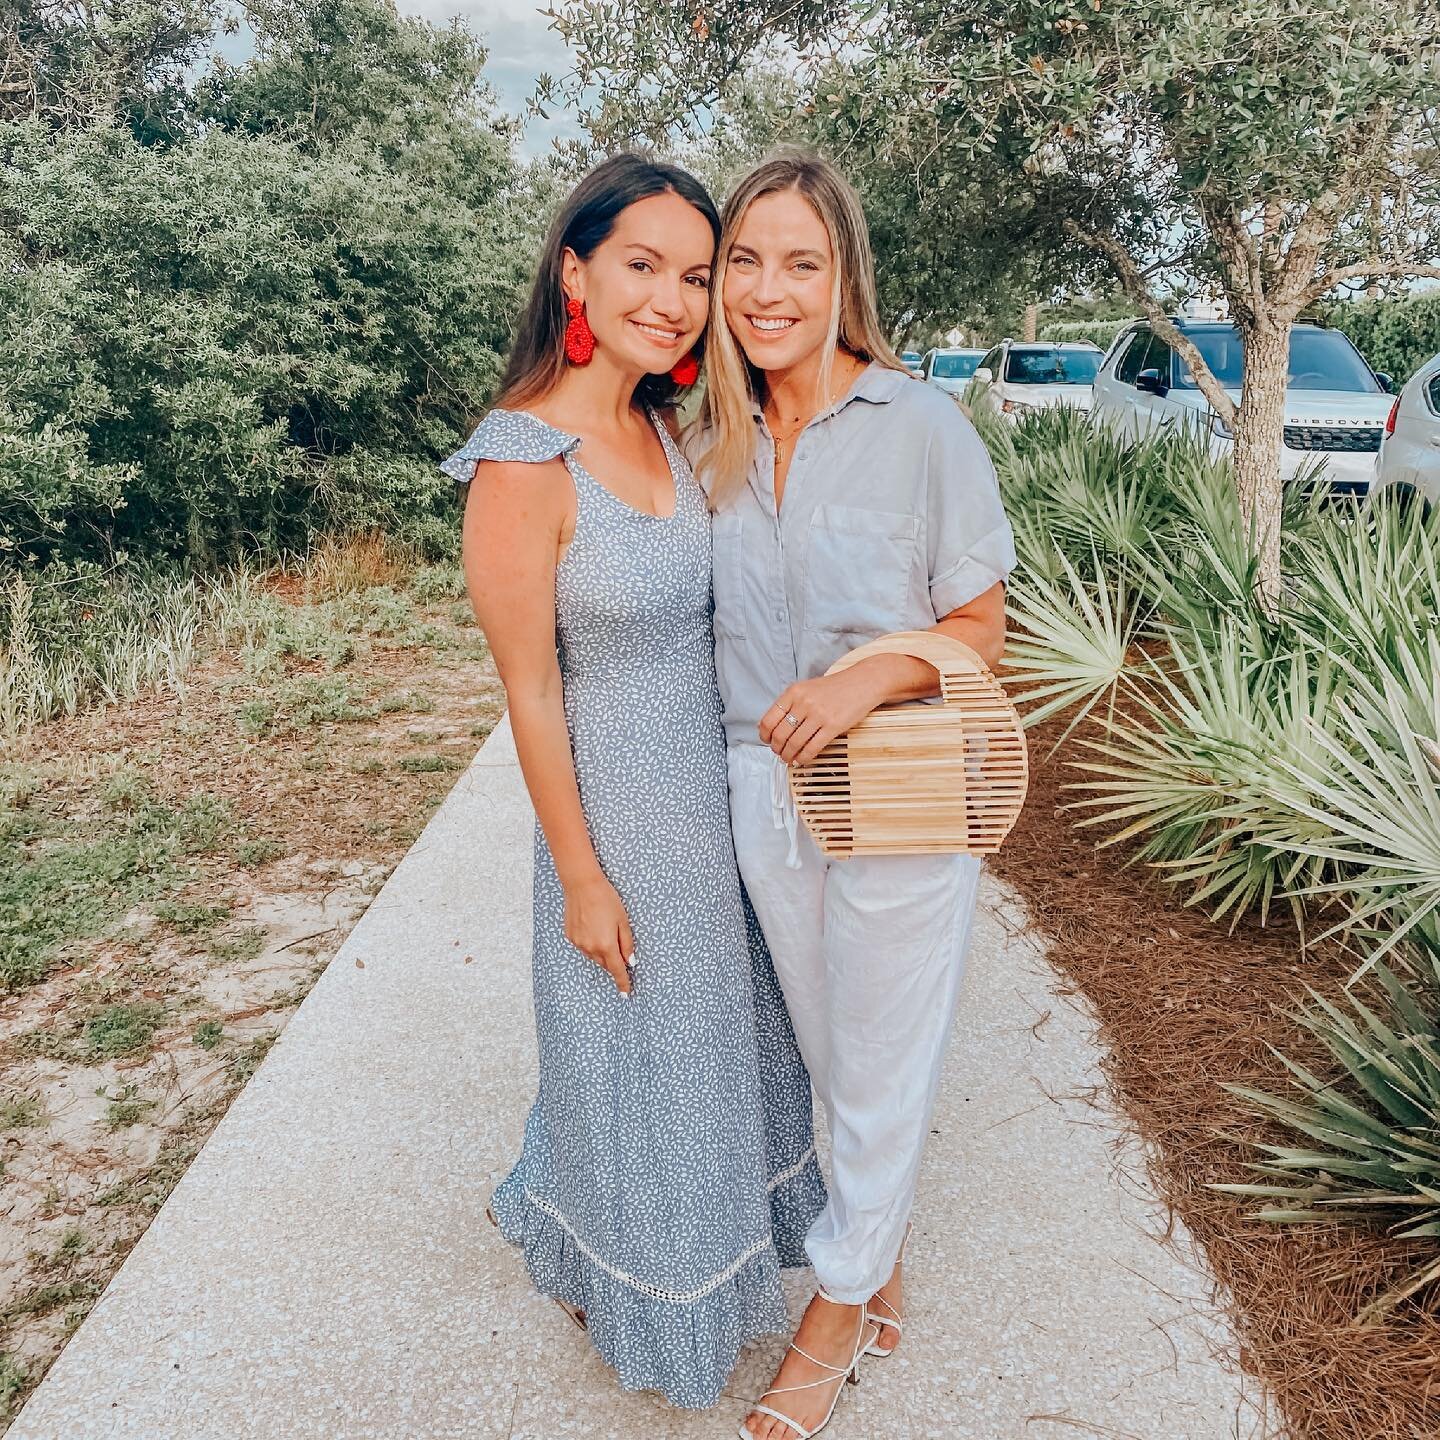 Grab your BESTIES because cycle syncing 21 day challenge enrollment is officially open 🥳🥳🥳

I have a very limited capacity in 1-1 coaching during the summer months, so this challenge is a great way to EDUCATE, EQUIP, and EMPOWER women to understan